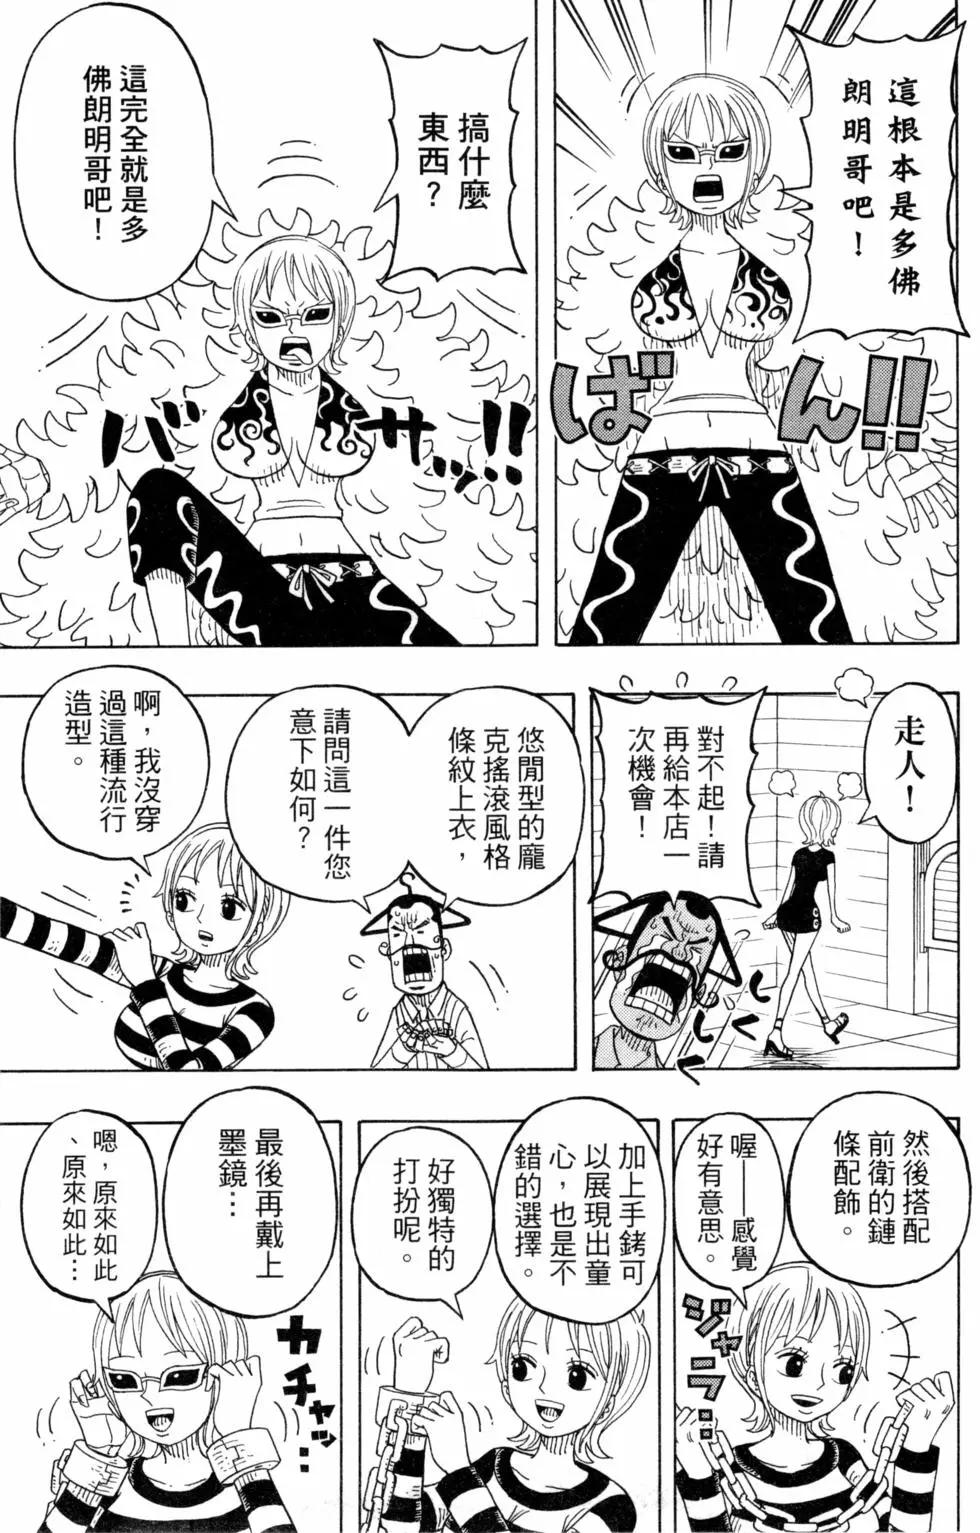 One piece party - 第06卷(2/4) - 6